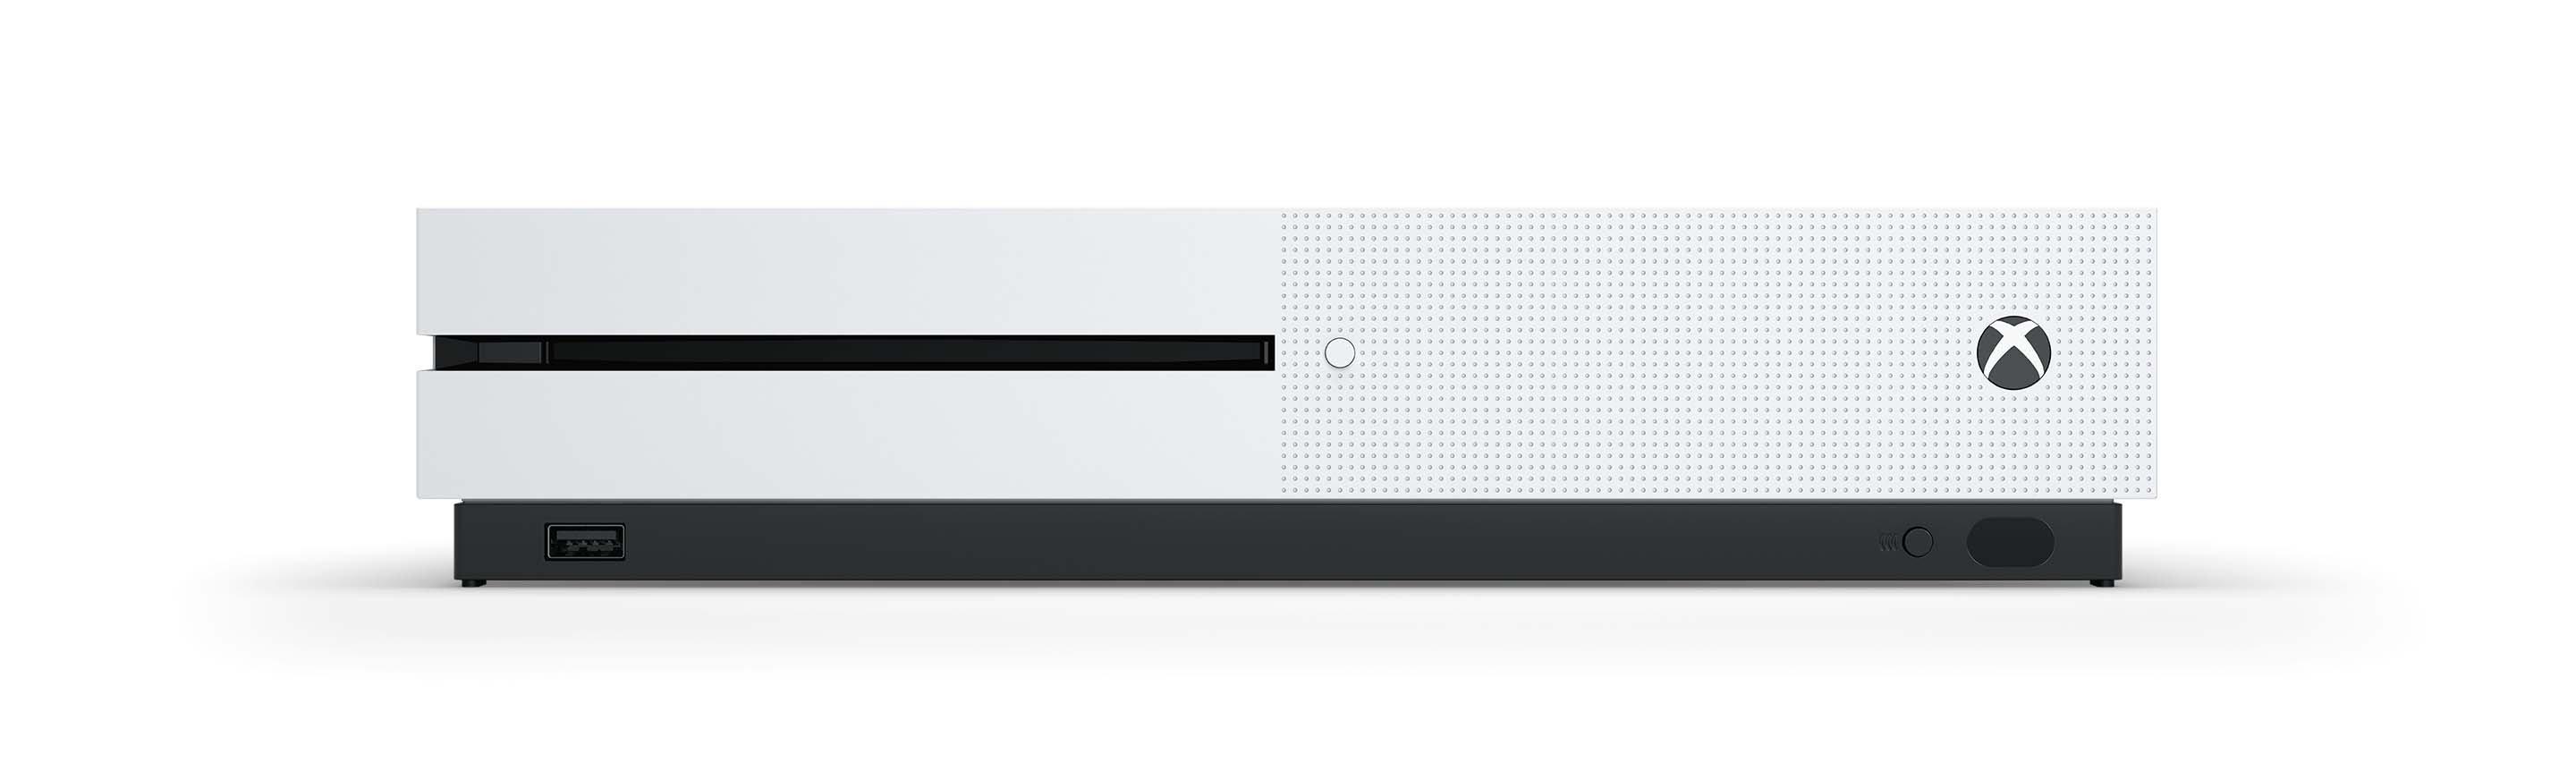 Microsoft Xbox One S 1TB All-Digital Edition Console (Disc-free Gaming),  White, NJP-00024